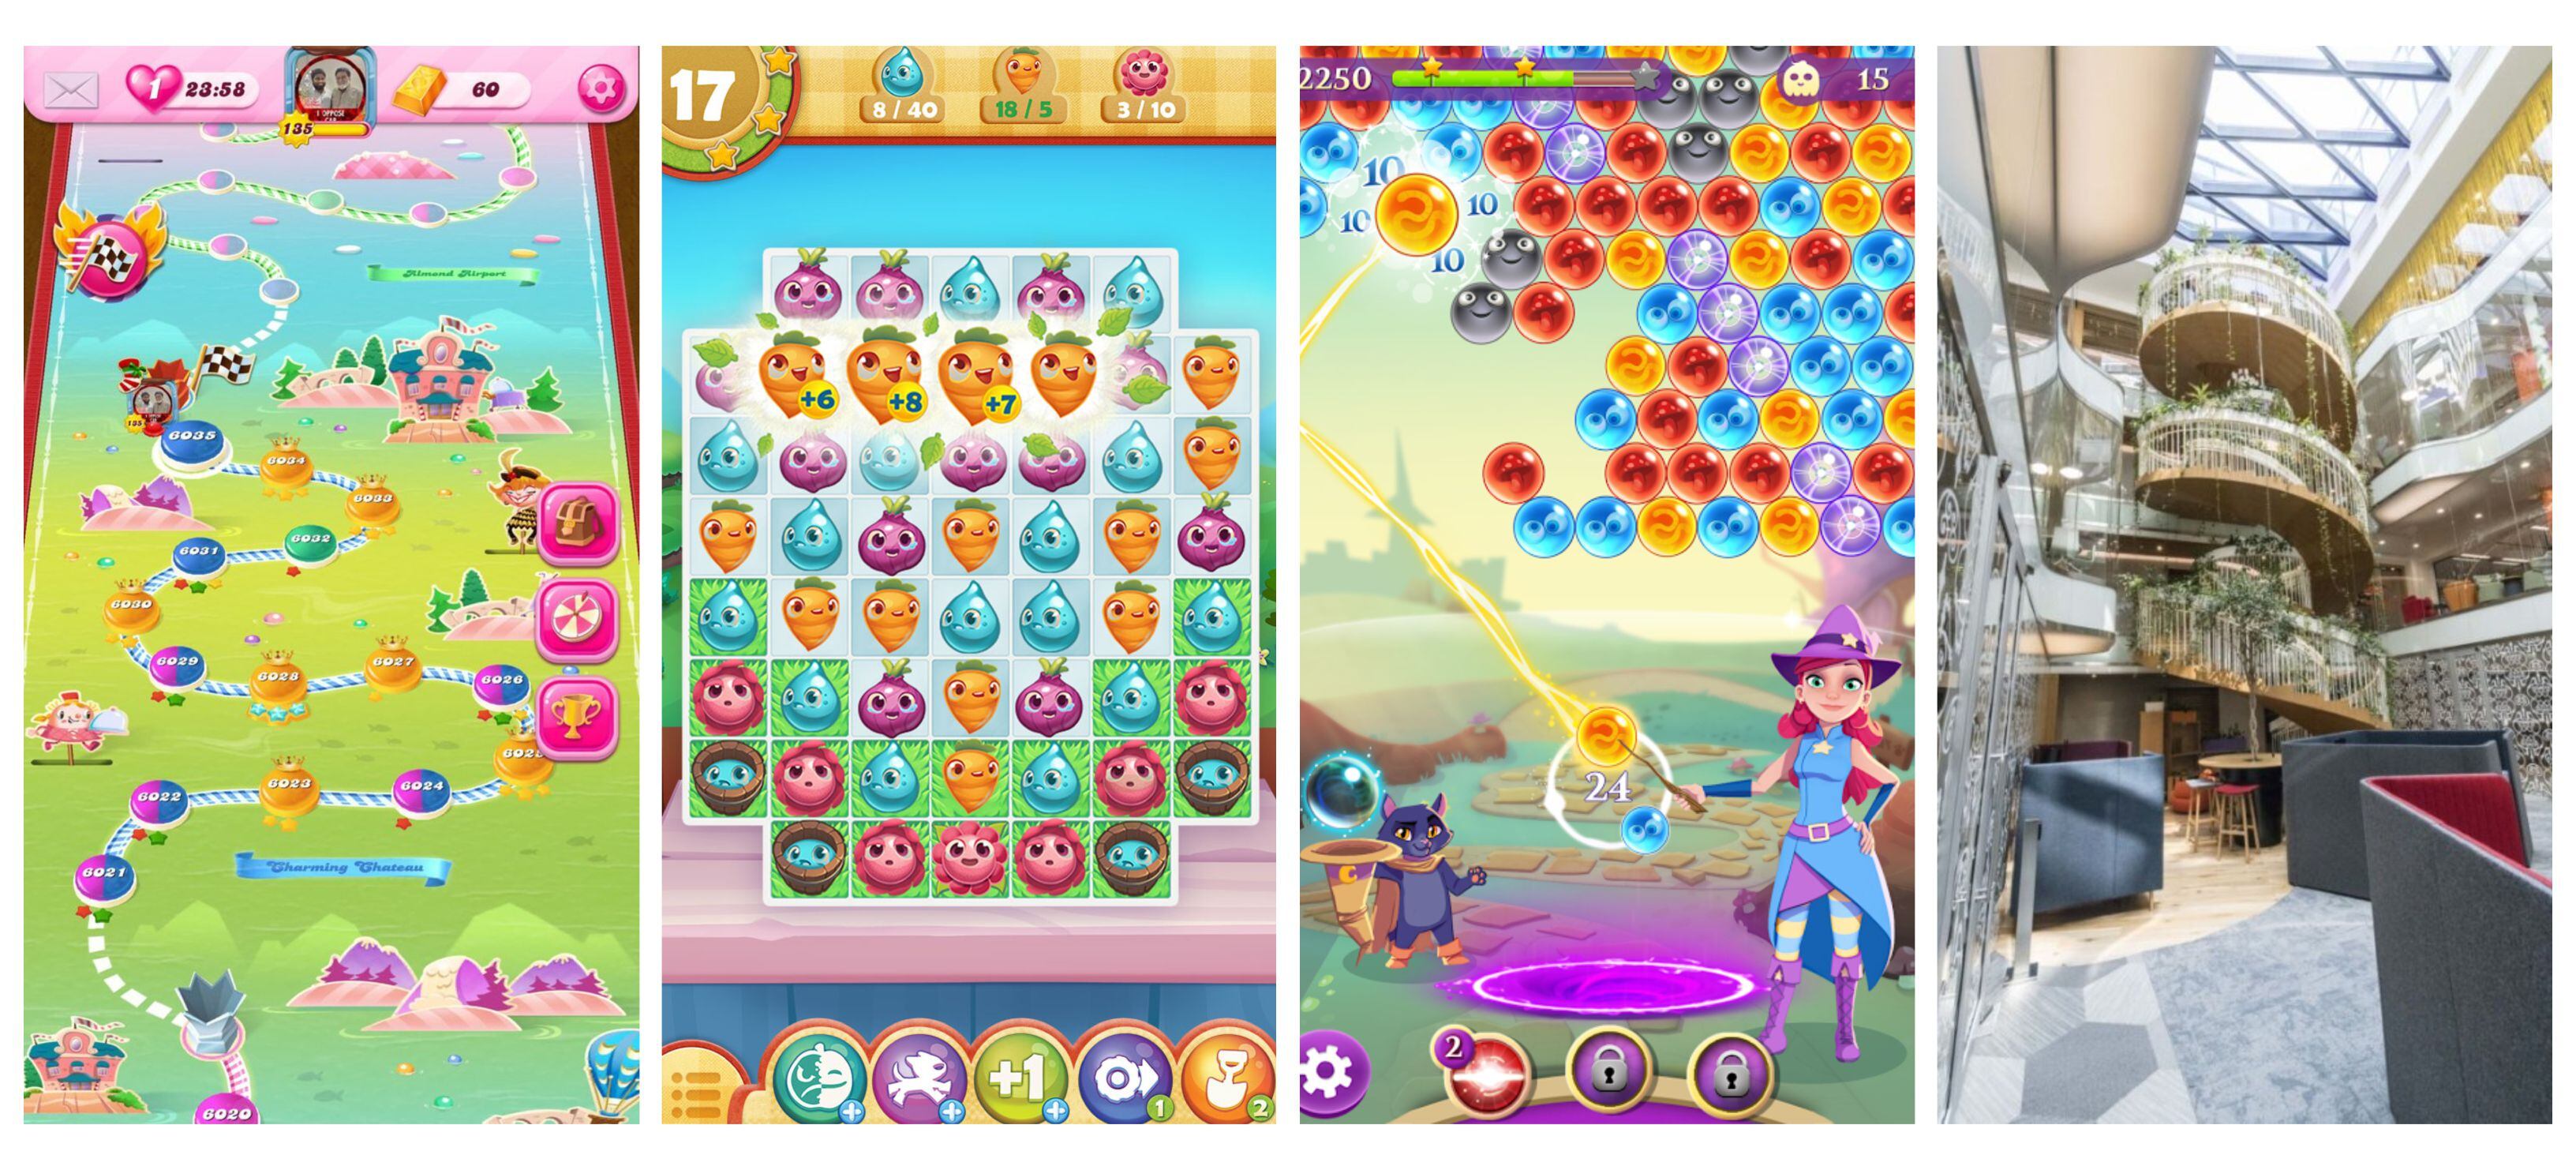 Images from 'Candy Crush', 'Farm Heroes', 'Bubble Witch' and King's London offices.